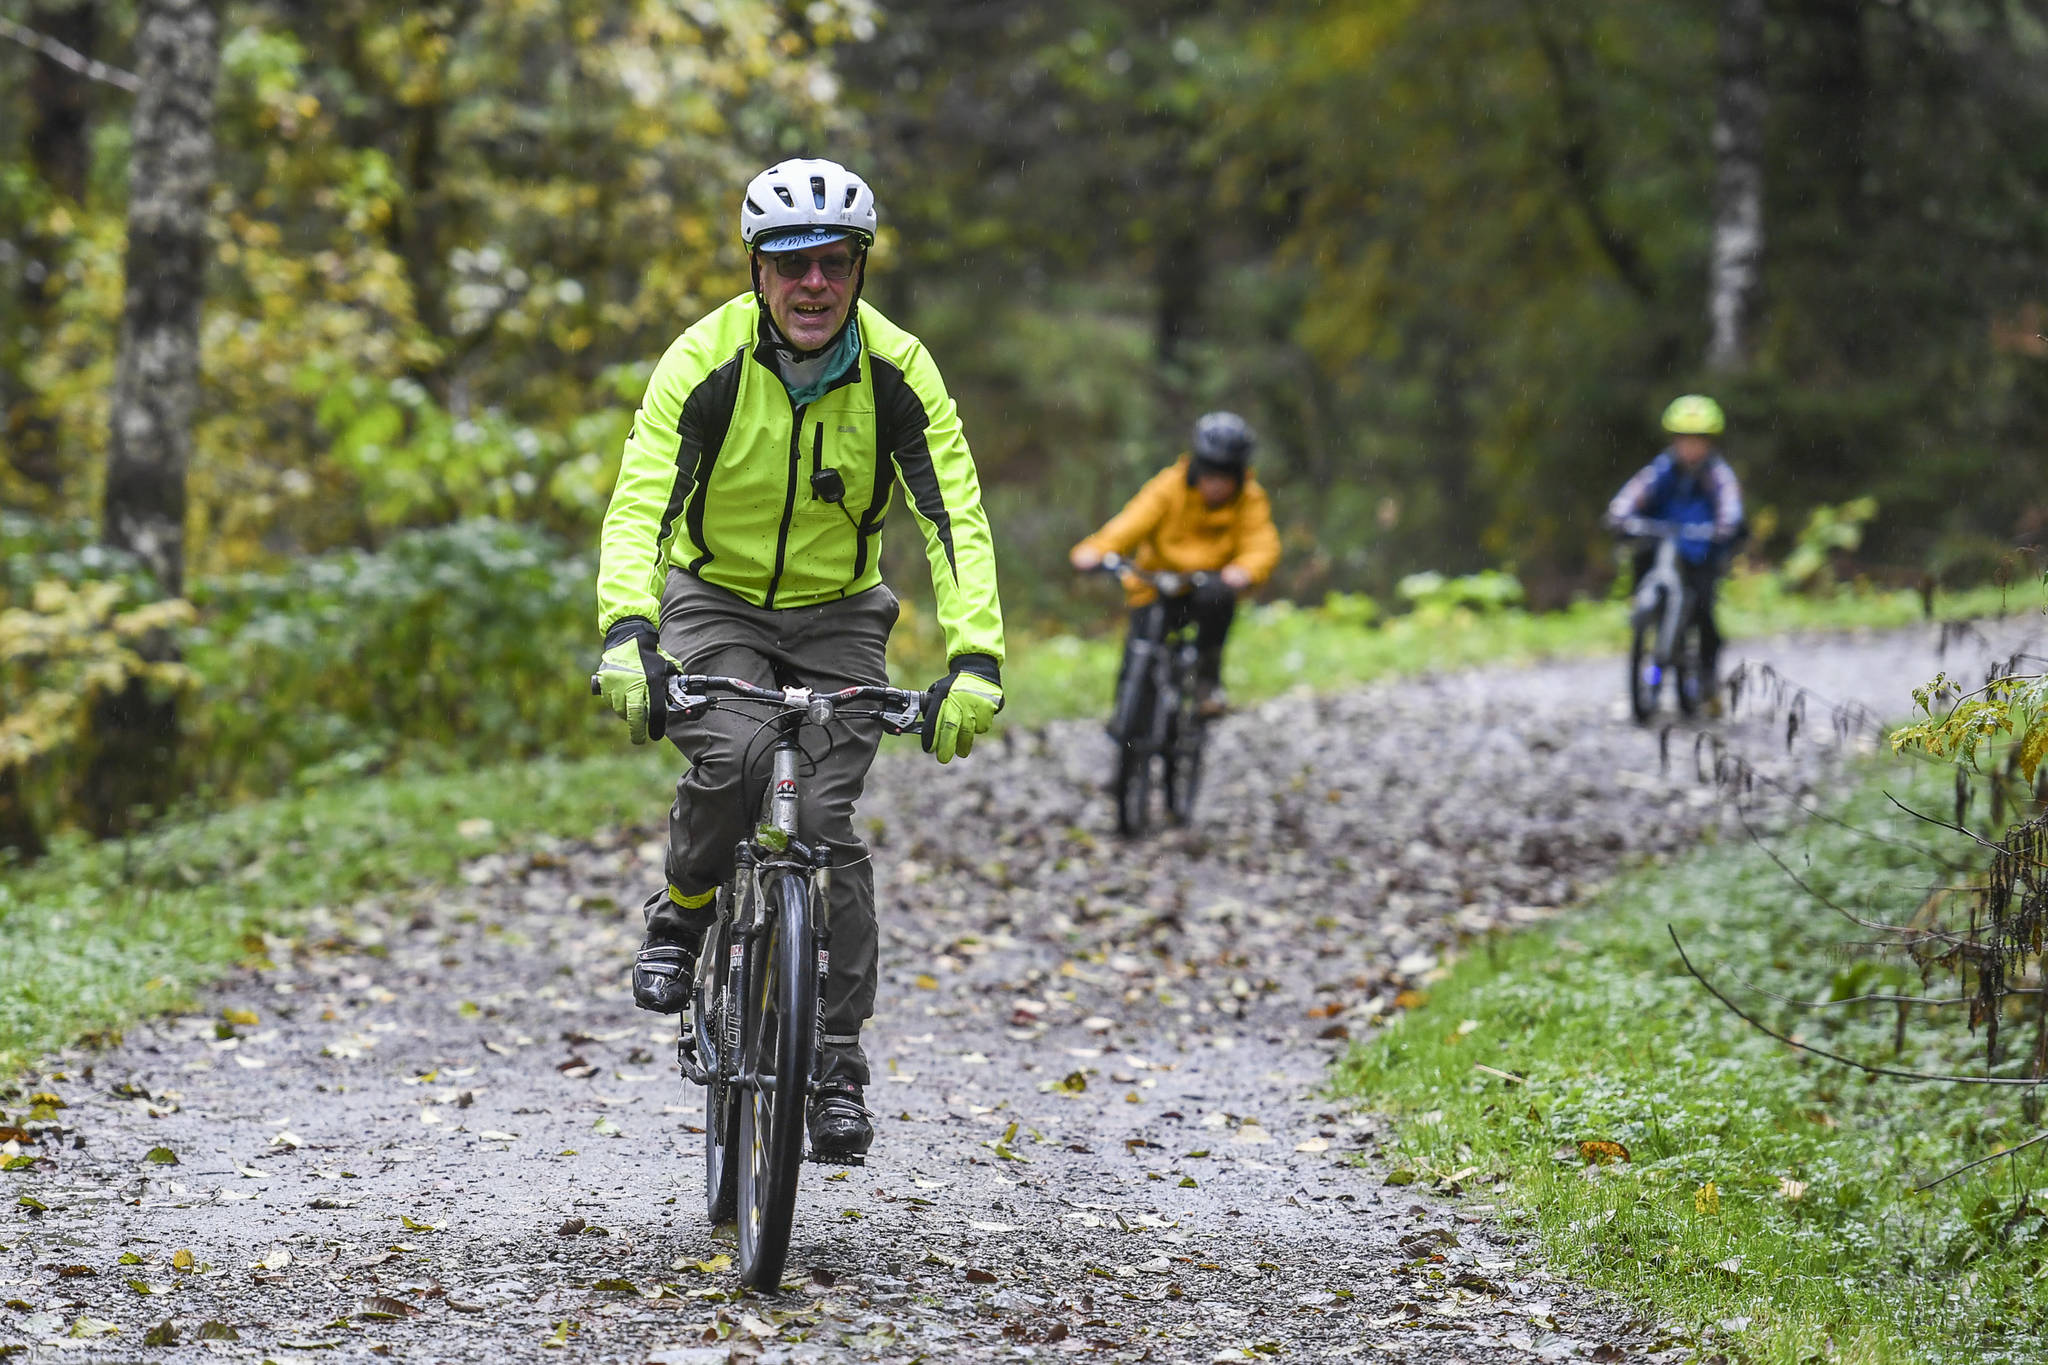 Dave Ringle leads riders on a fun run at the Douglas Dirt Derby Youth Bike Race at Savikko Park and the Treadwell Historic Trail on Saturday, Oct. 5, 2019. The event was organized by the Juneau Freewheelers Bicycle Club. (Michael Penn | Juneau Empire)